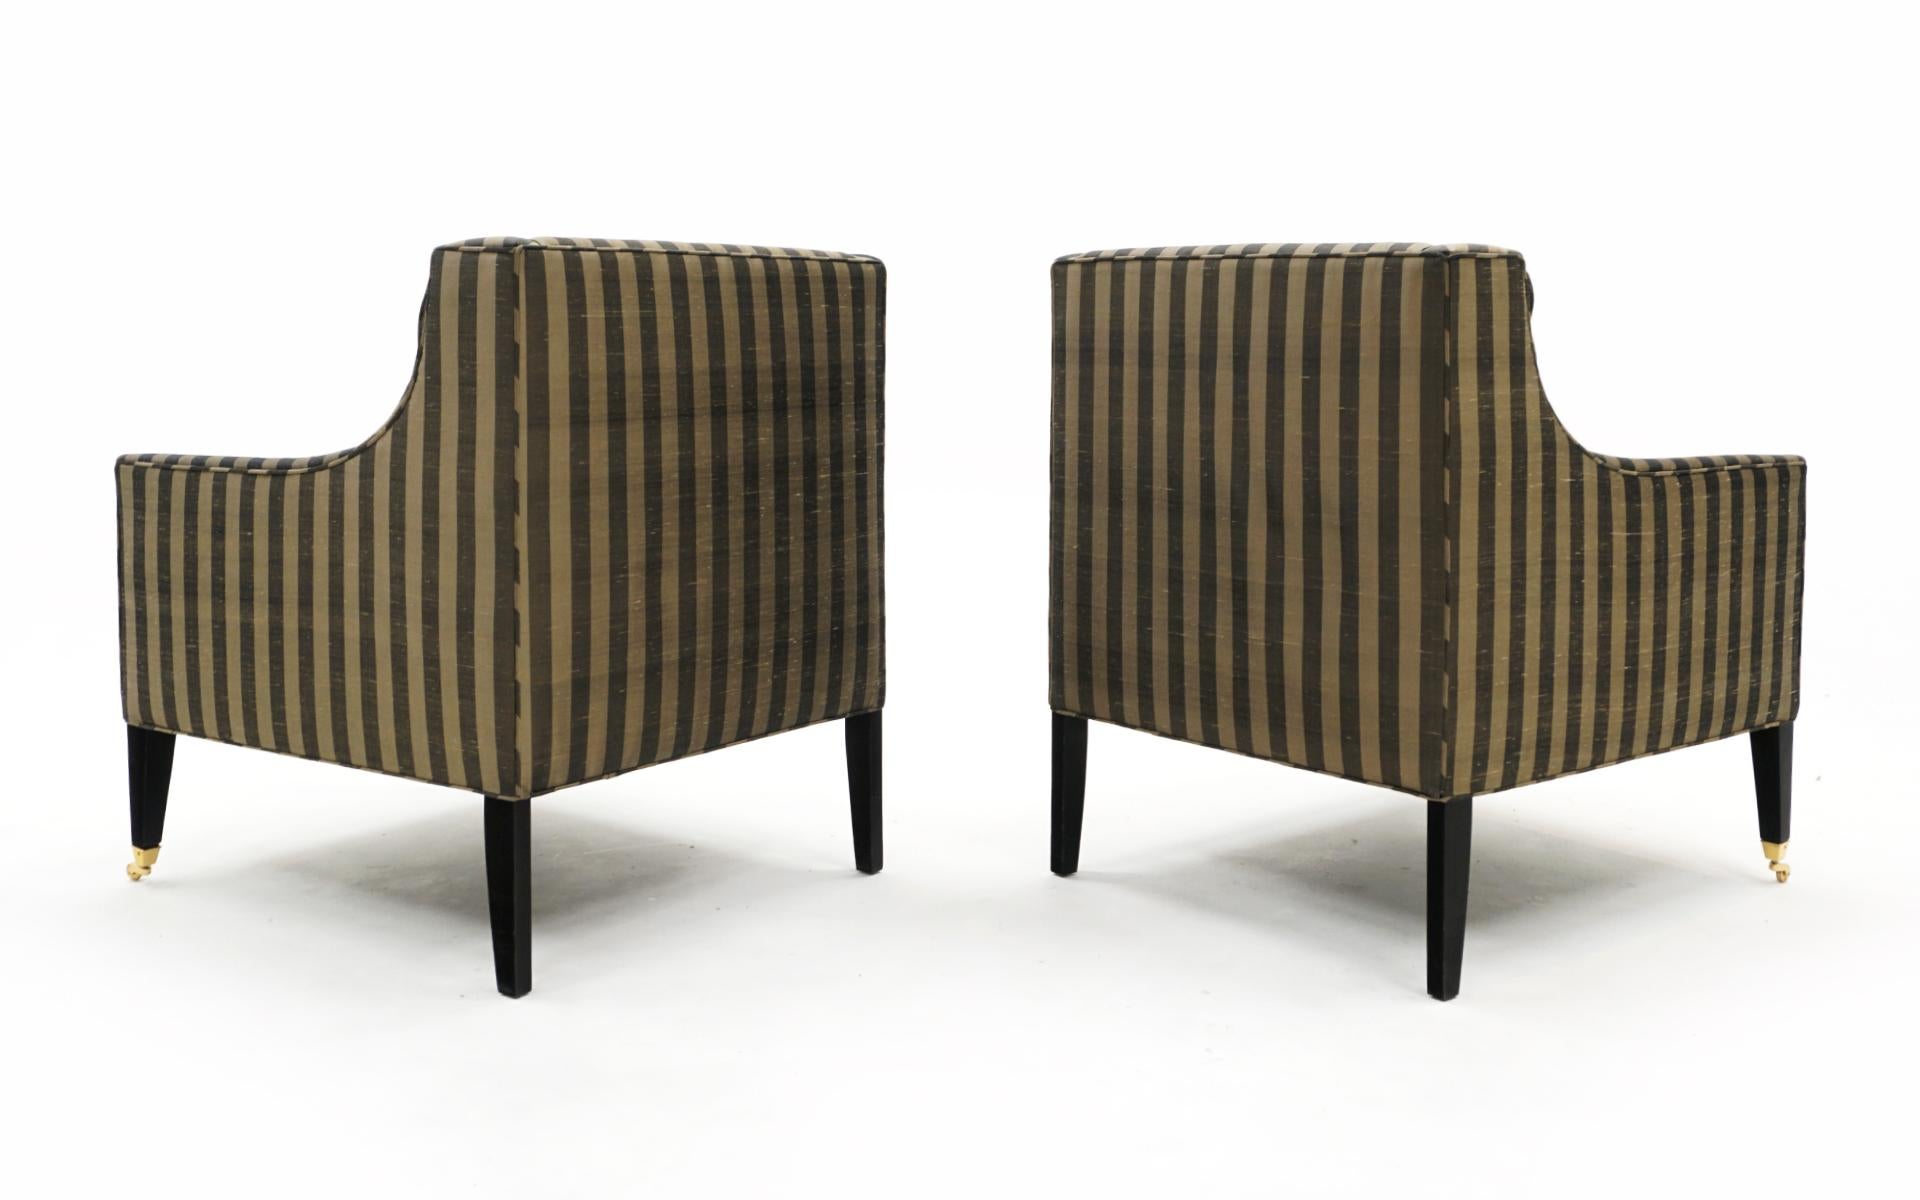 Late 20th Century Pair of Lounge Chairs in Tan and Gray Stripes in the Style of Dunbar For Sale